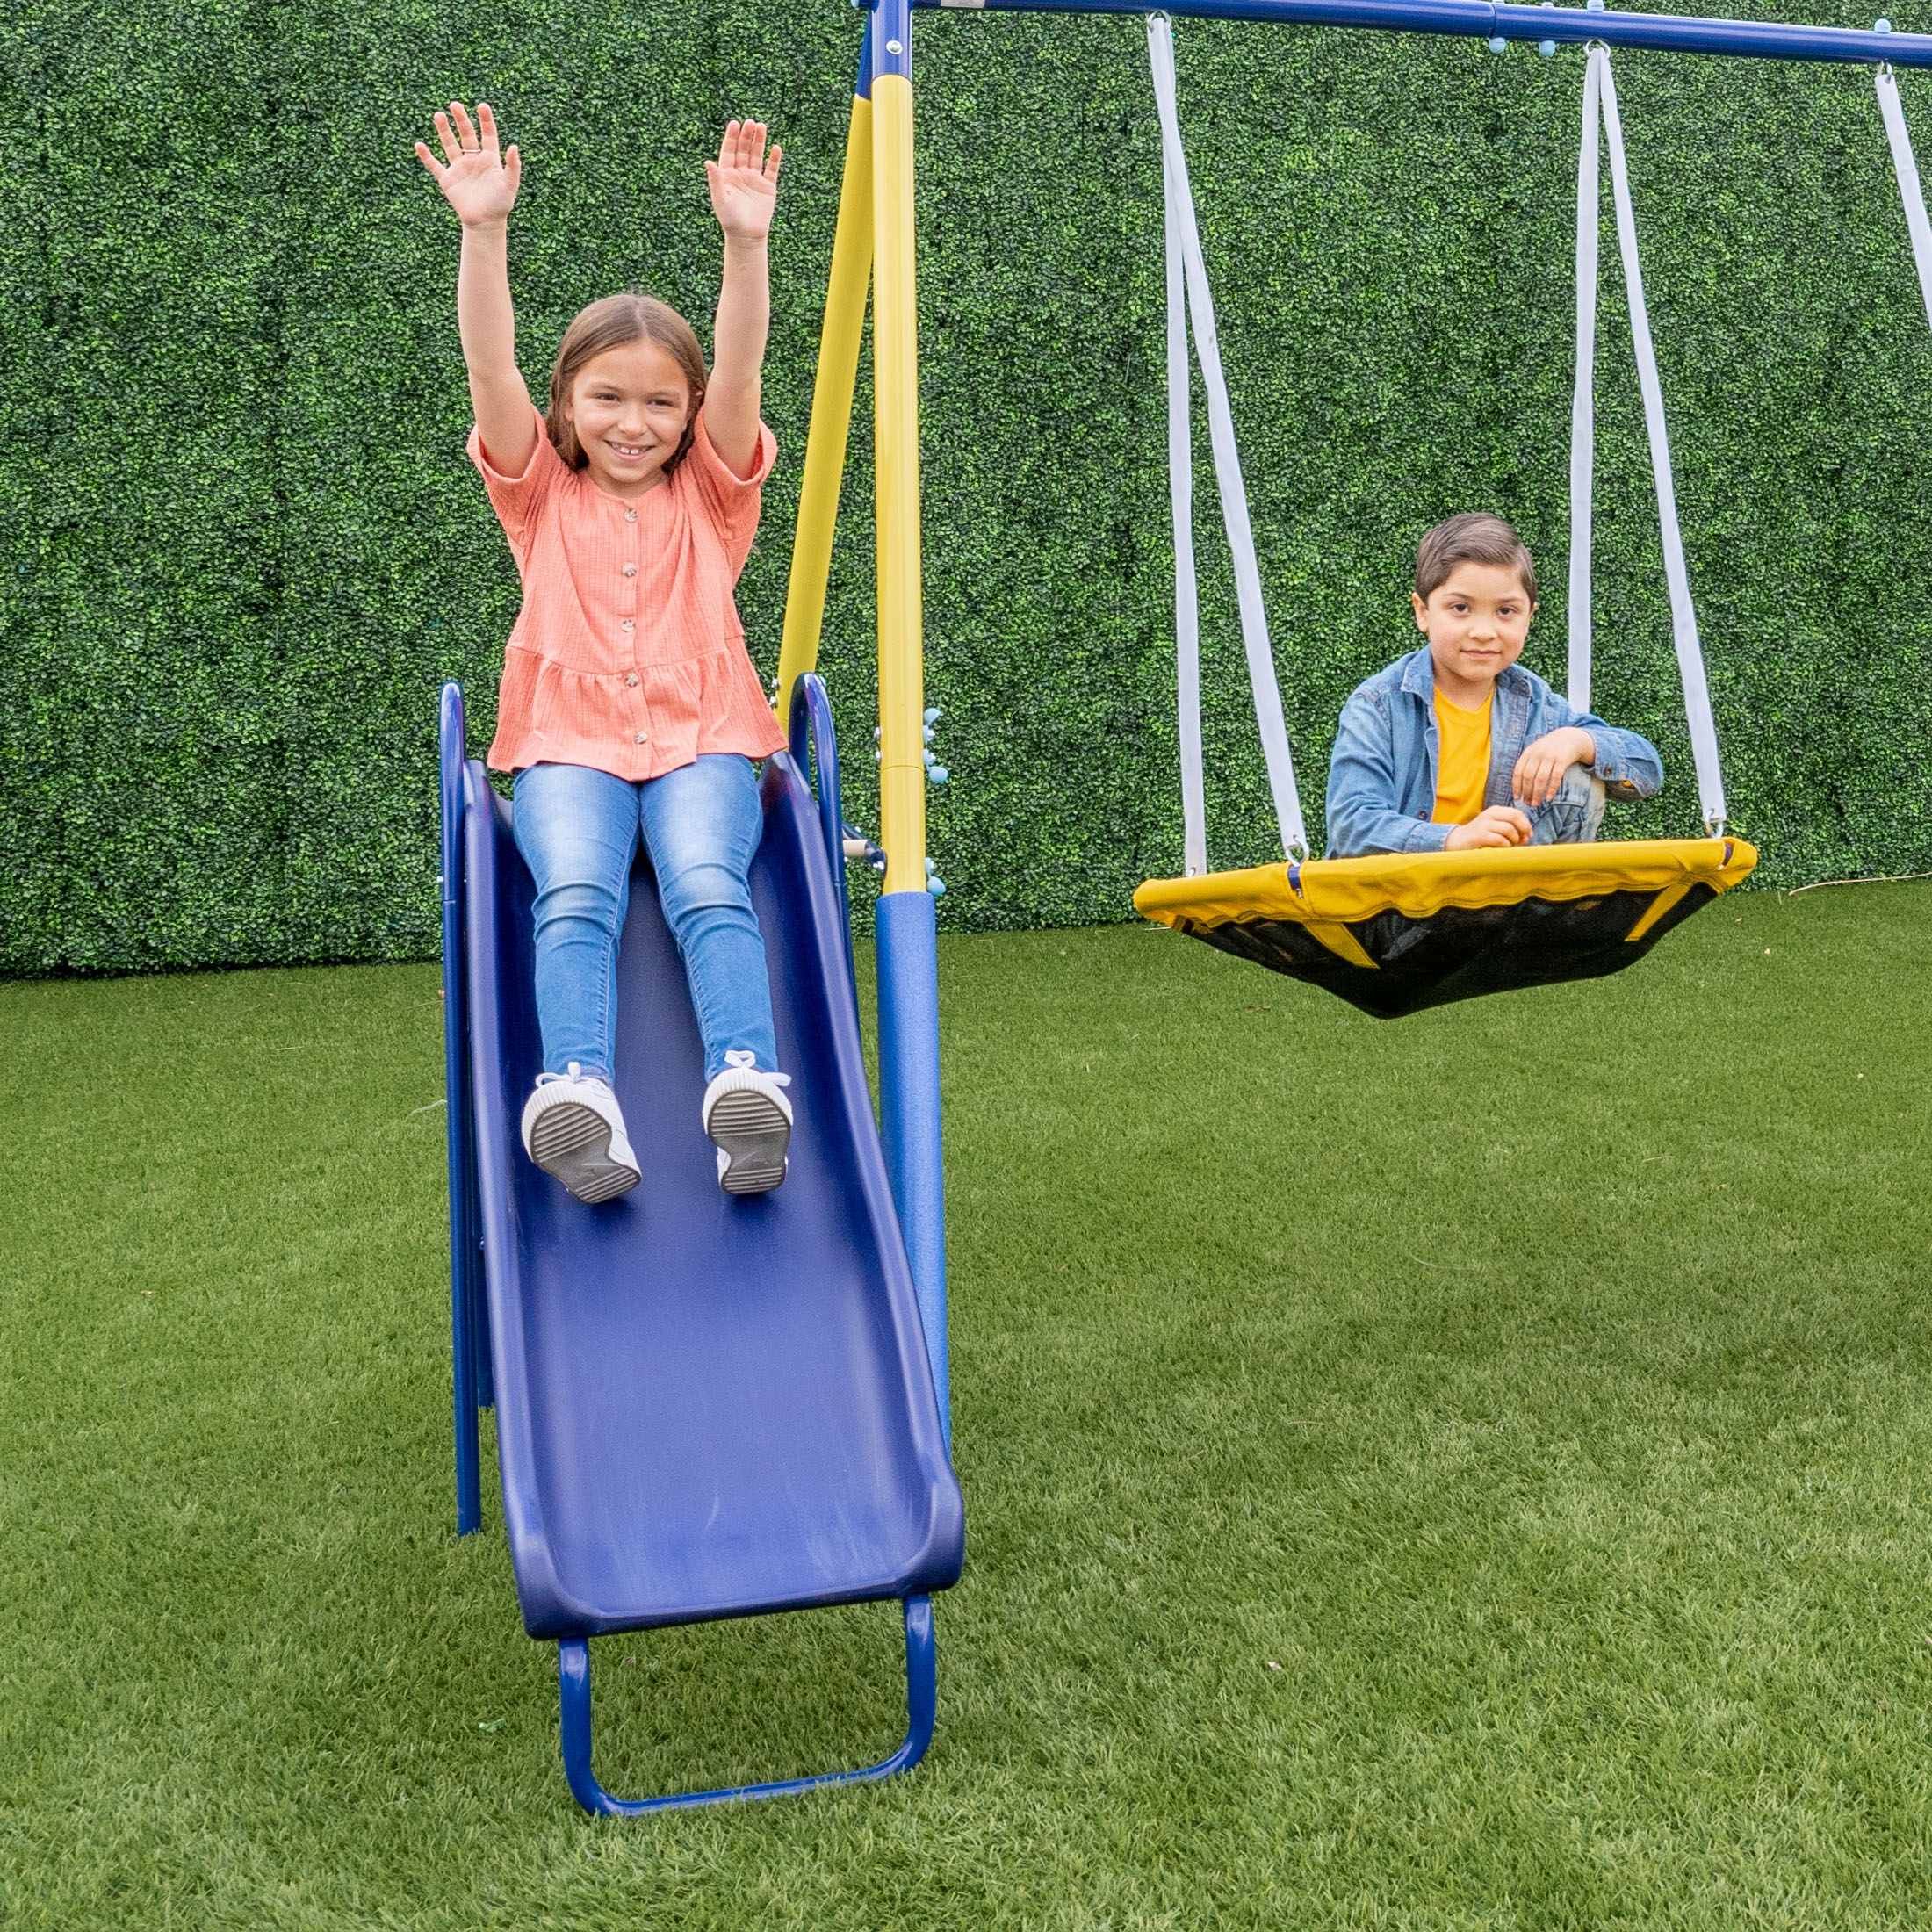 Sportspower Super Flyer Swing Set with 2 Flying Buddies, Saucer Swing, 2 Swings, and Lifetime Warranty on Blow Molded Slide - image 4 of 14